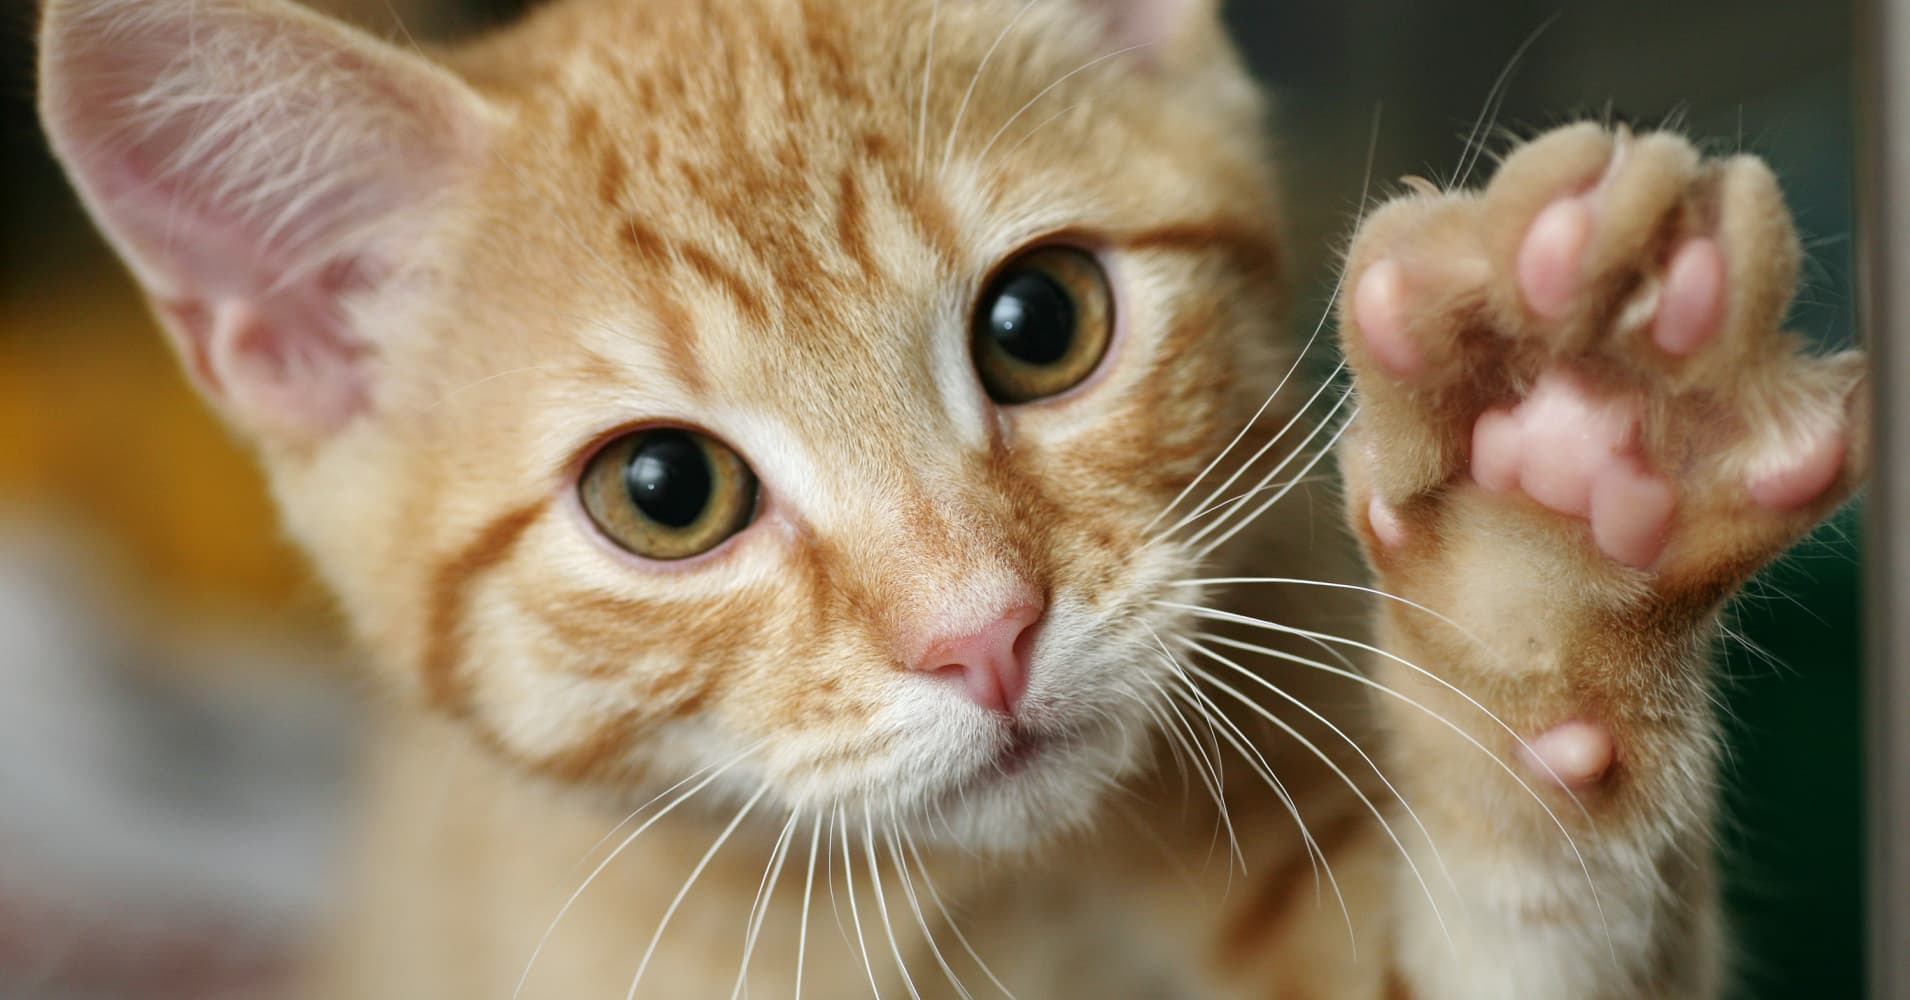 USDA ends practice of deadly experiments on kittens